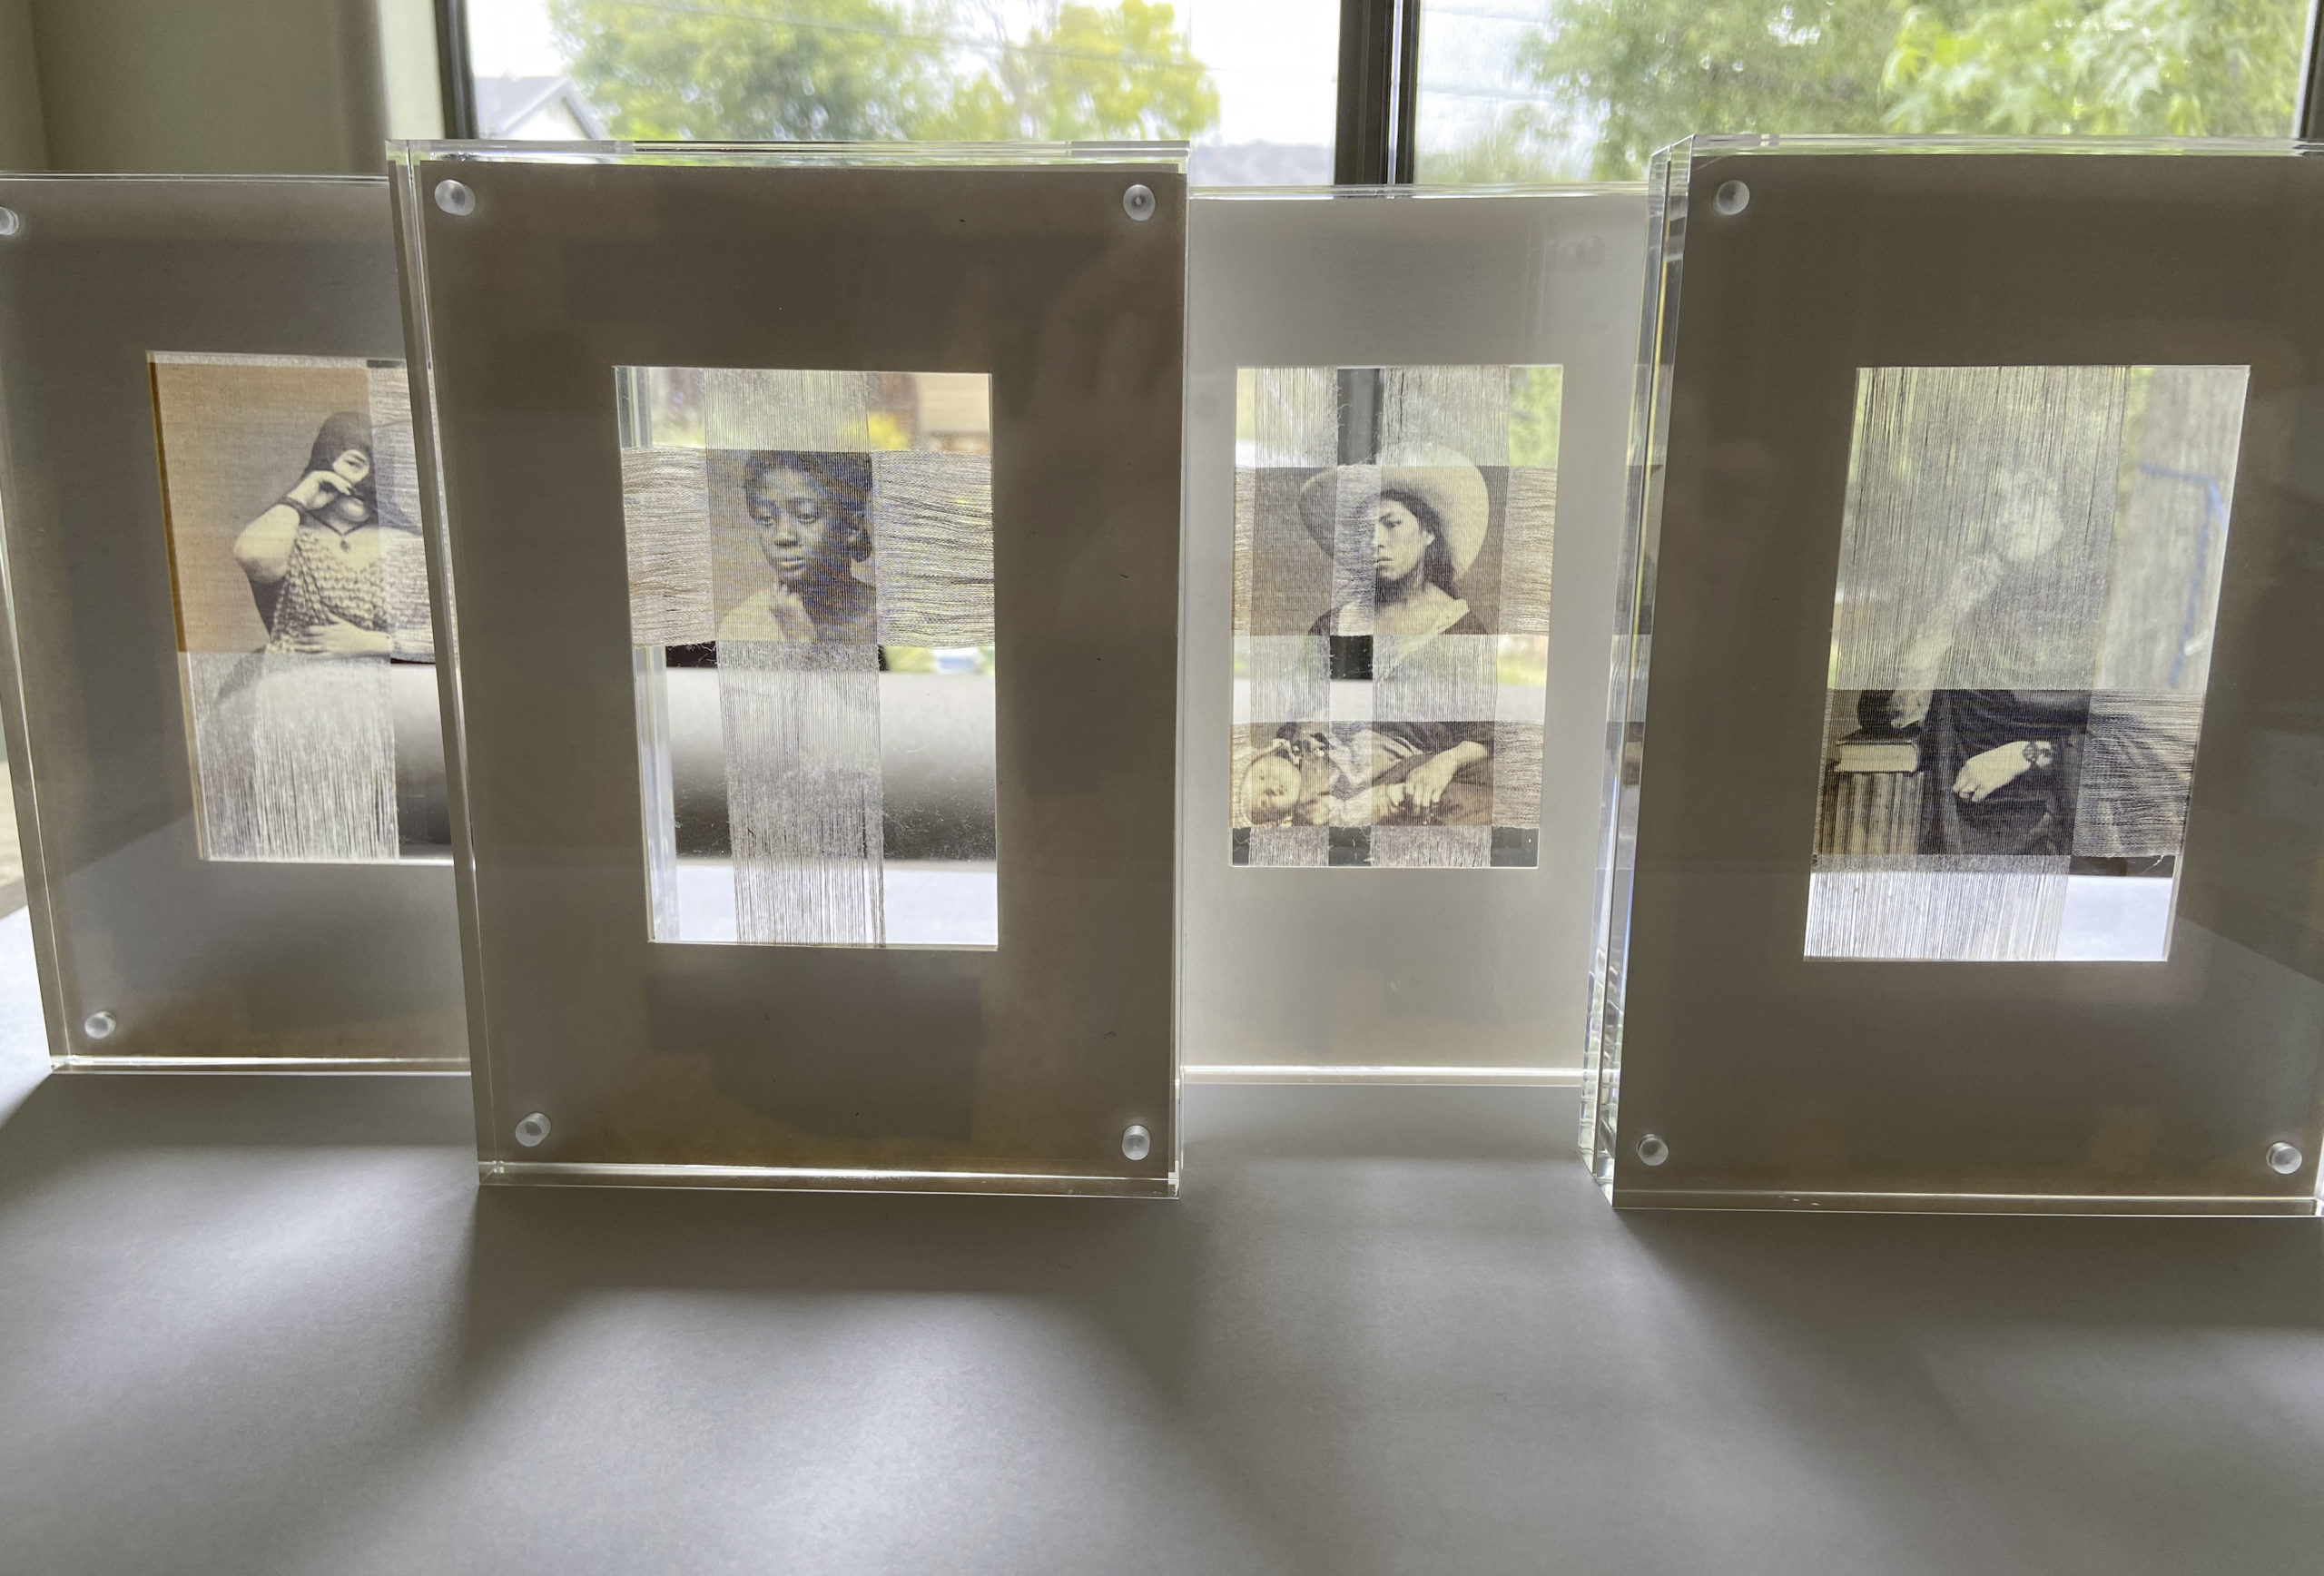 Portraits of Unidentified Women, series of four, glass-encased textiles. From L to R: Witty, Thoughtful, Sensitive, Well-Read. 